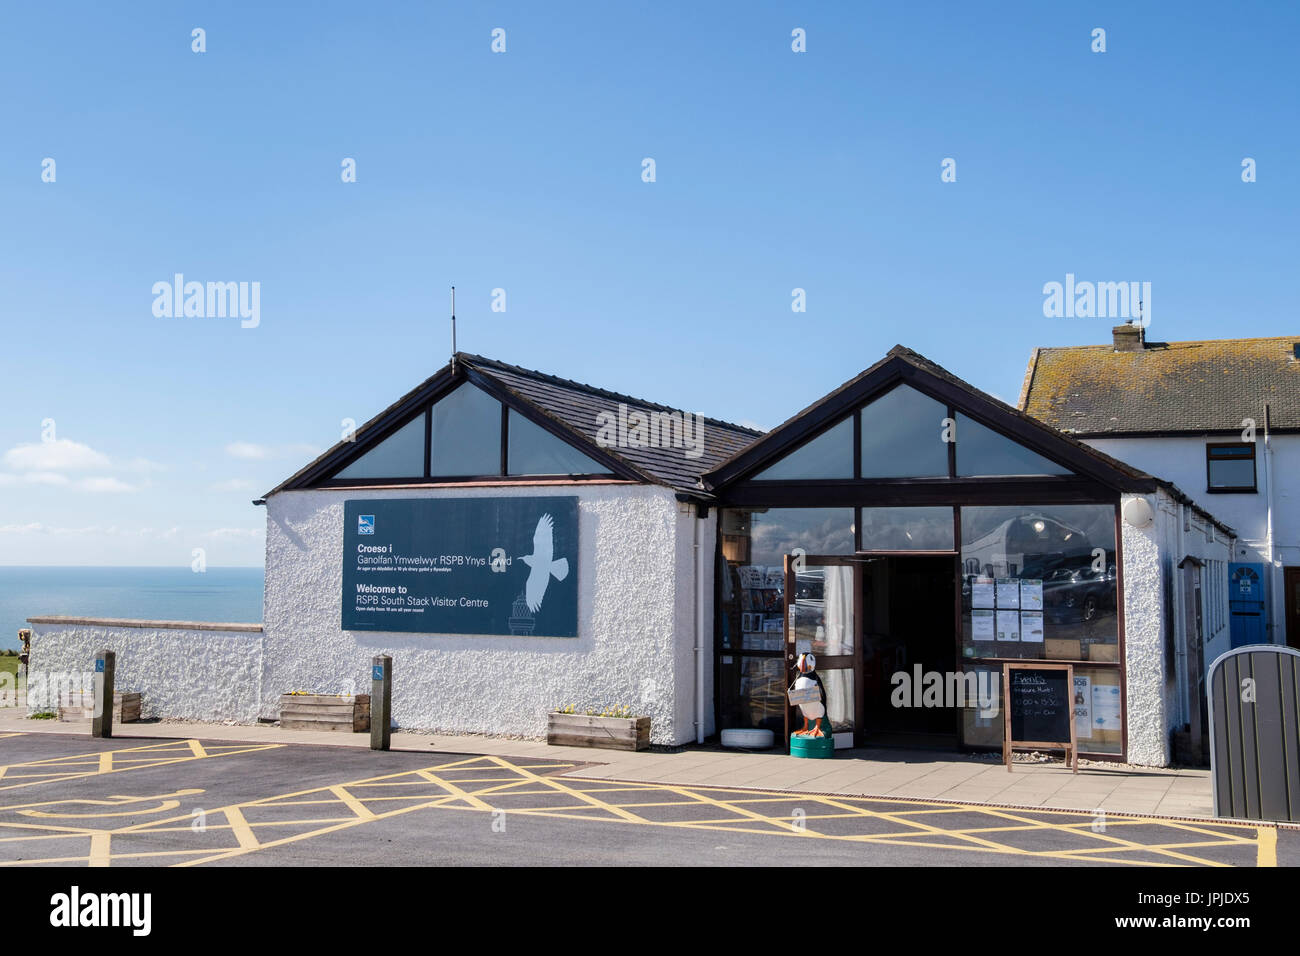 RSPB South Stack Visitor Centre shop and cafe with disabled parking bays outside. Holyhead, Holy Island, Isle of Anglesey (Ynys Mon), Wales, UK Stock Photo